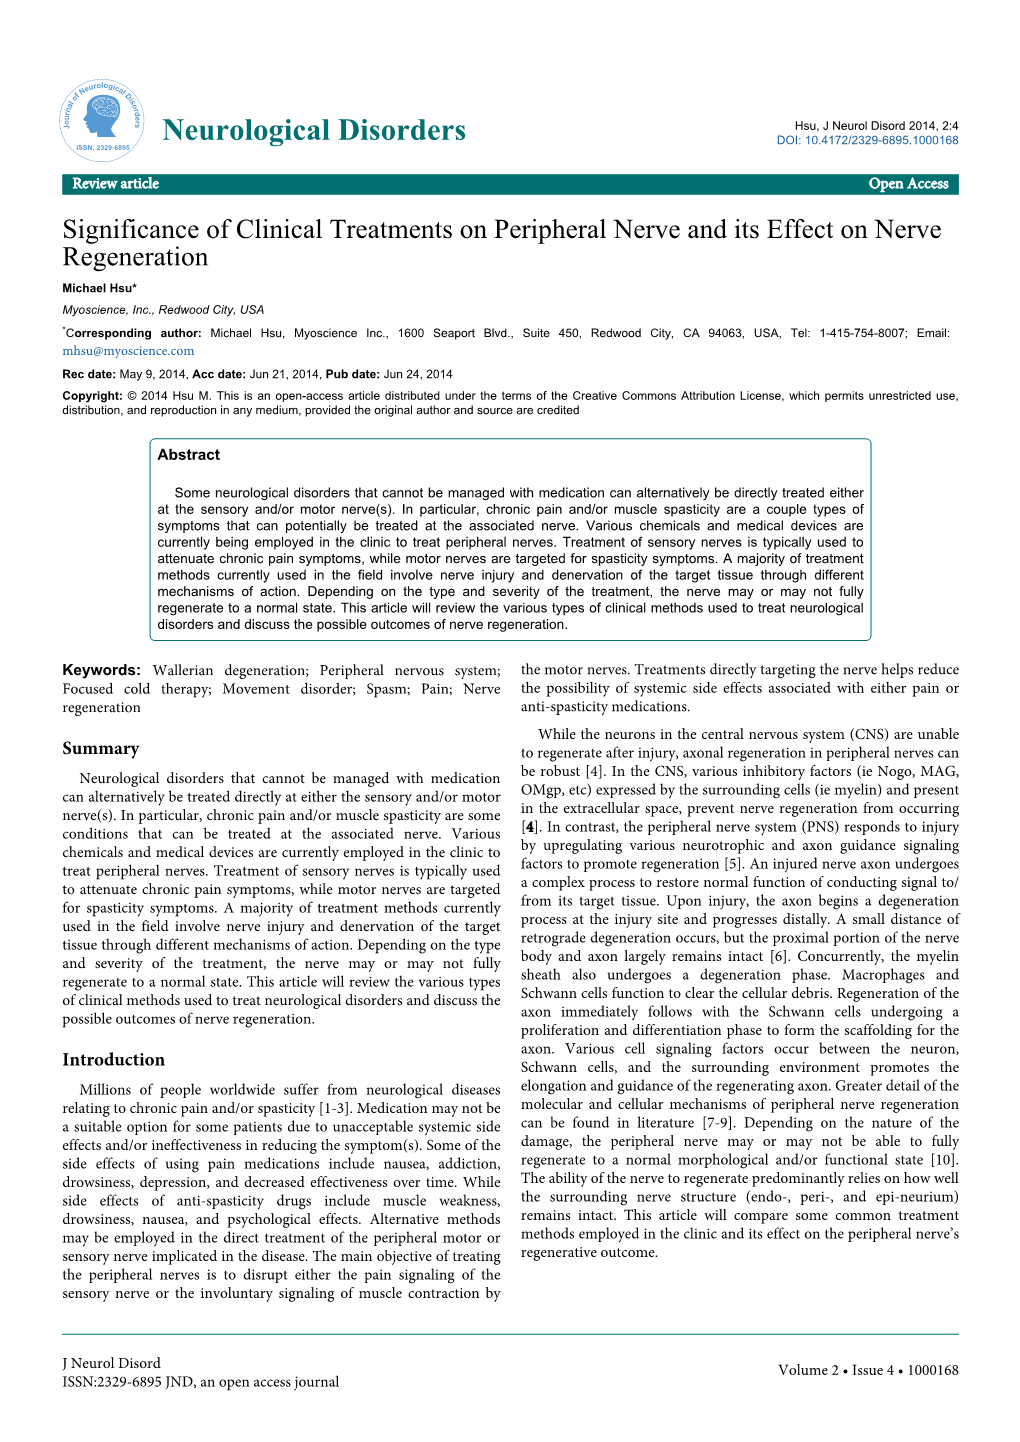 Significance of Clinical Treatments on Peripheral Nerve and Its Effect On